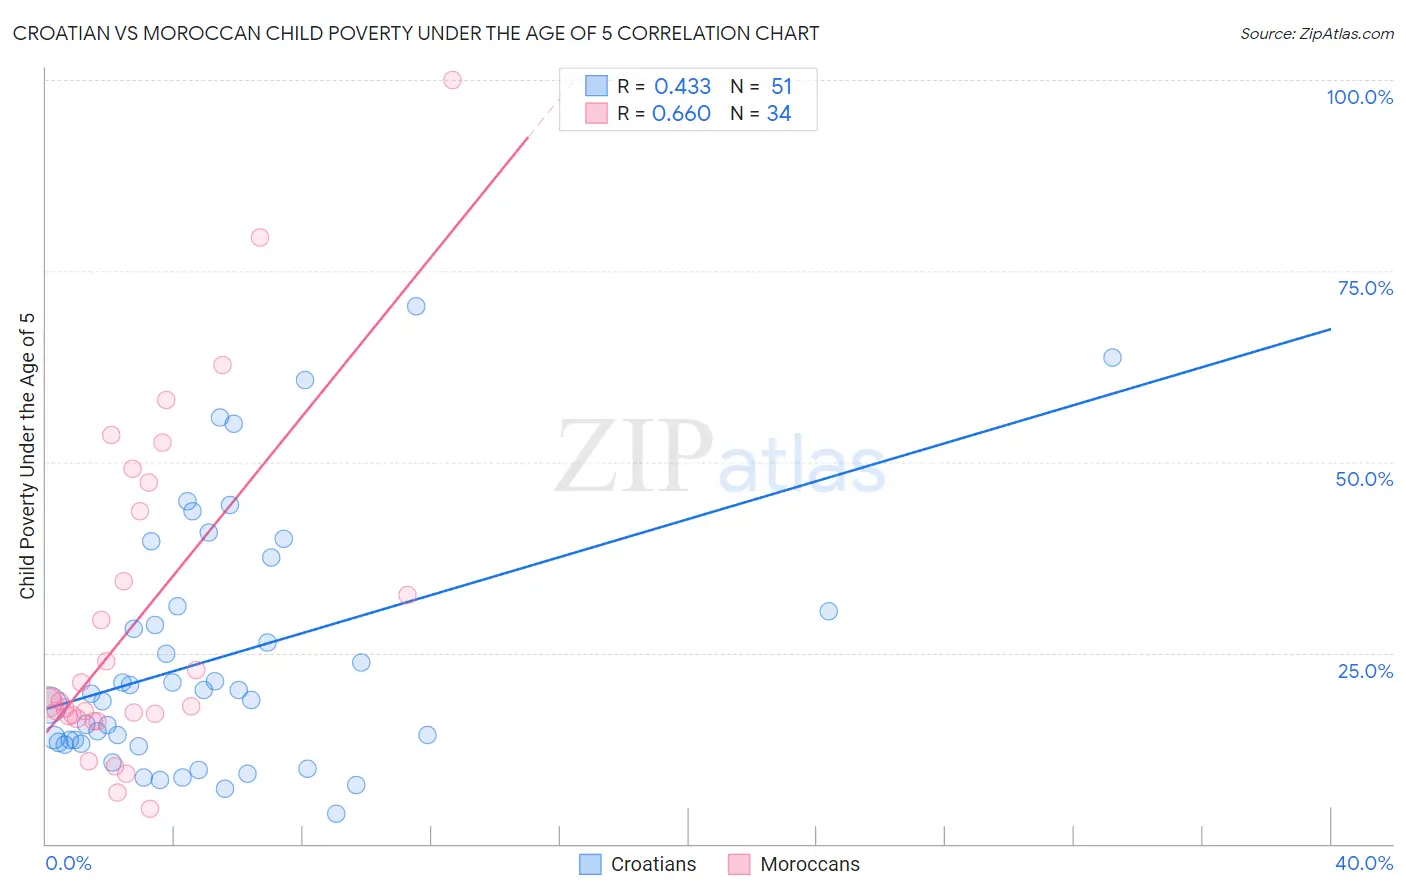 Croatian vs Moroccan Child Poverty Under the Age of 5